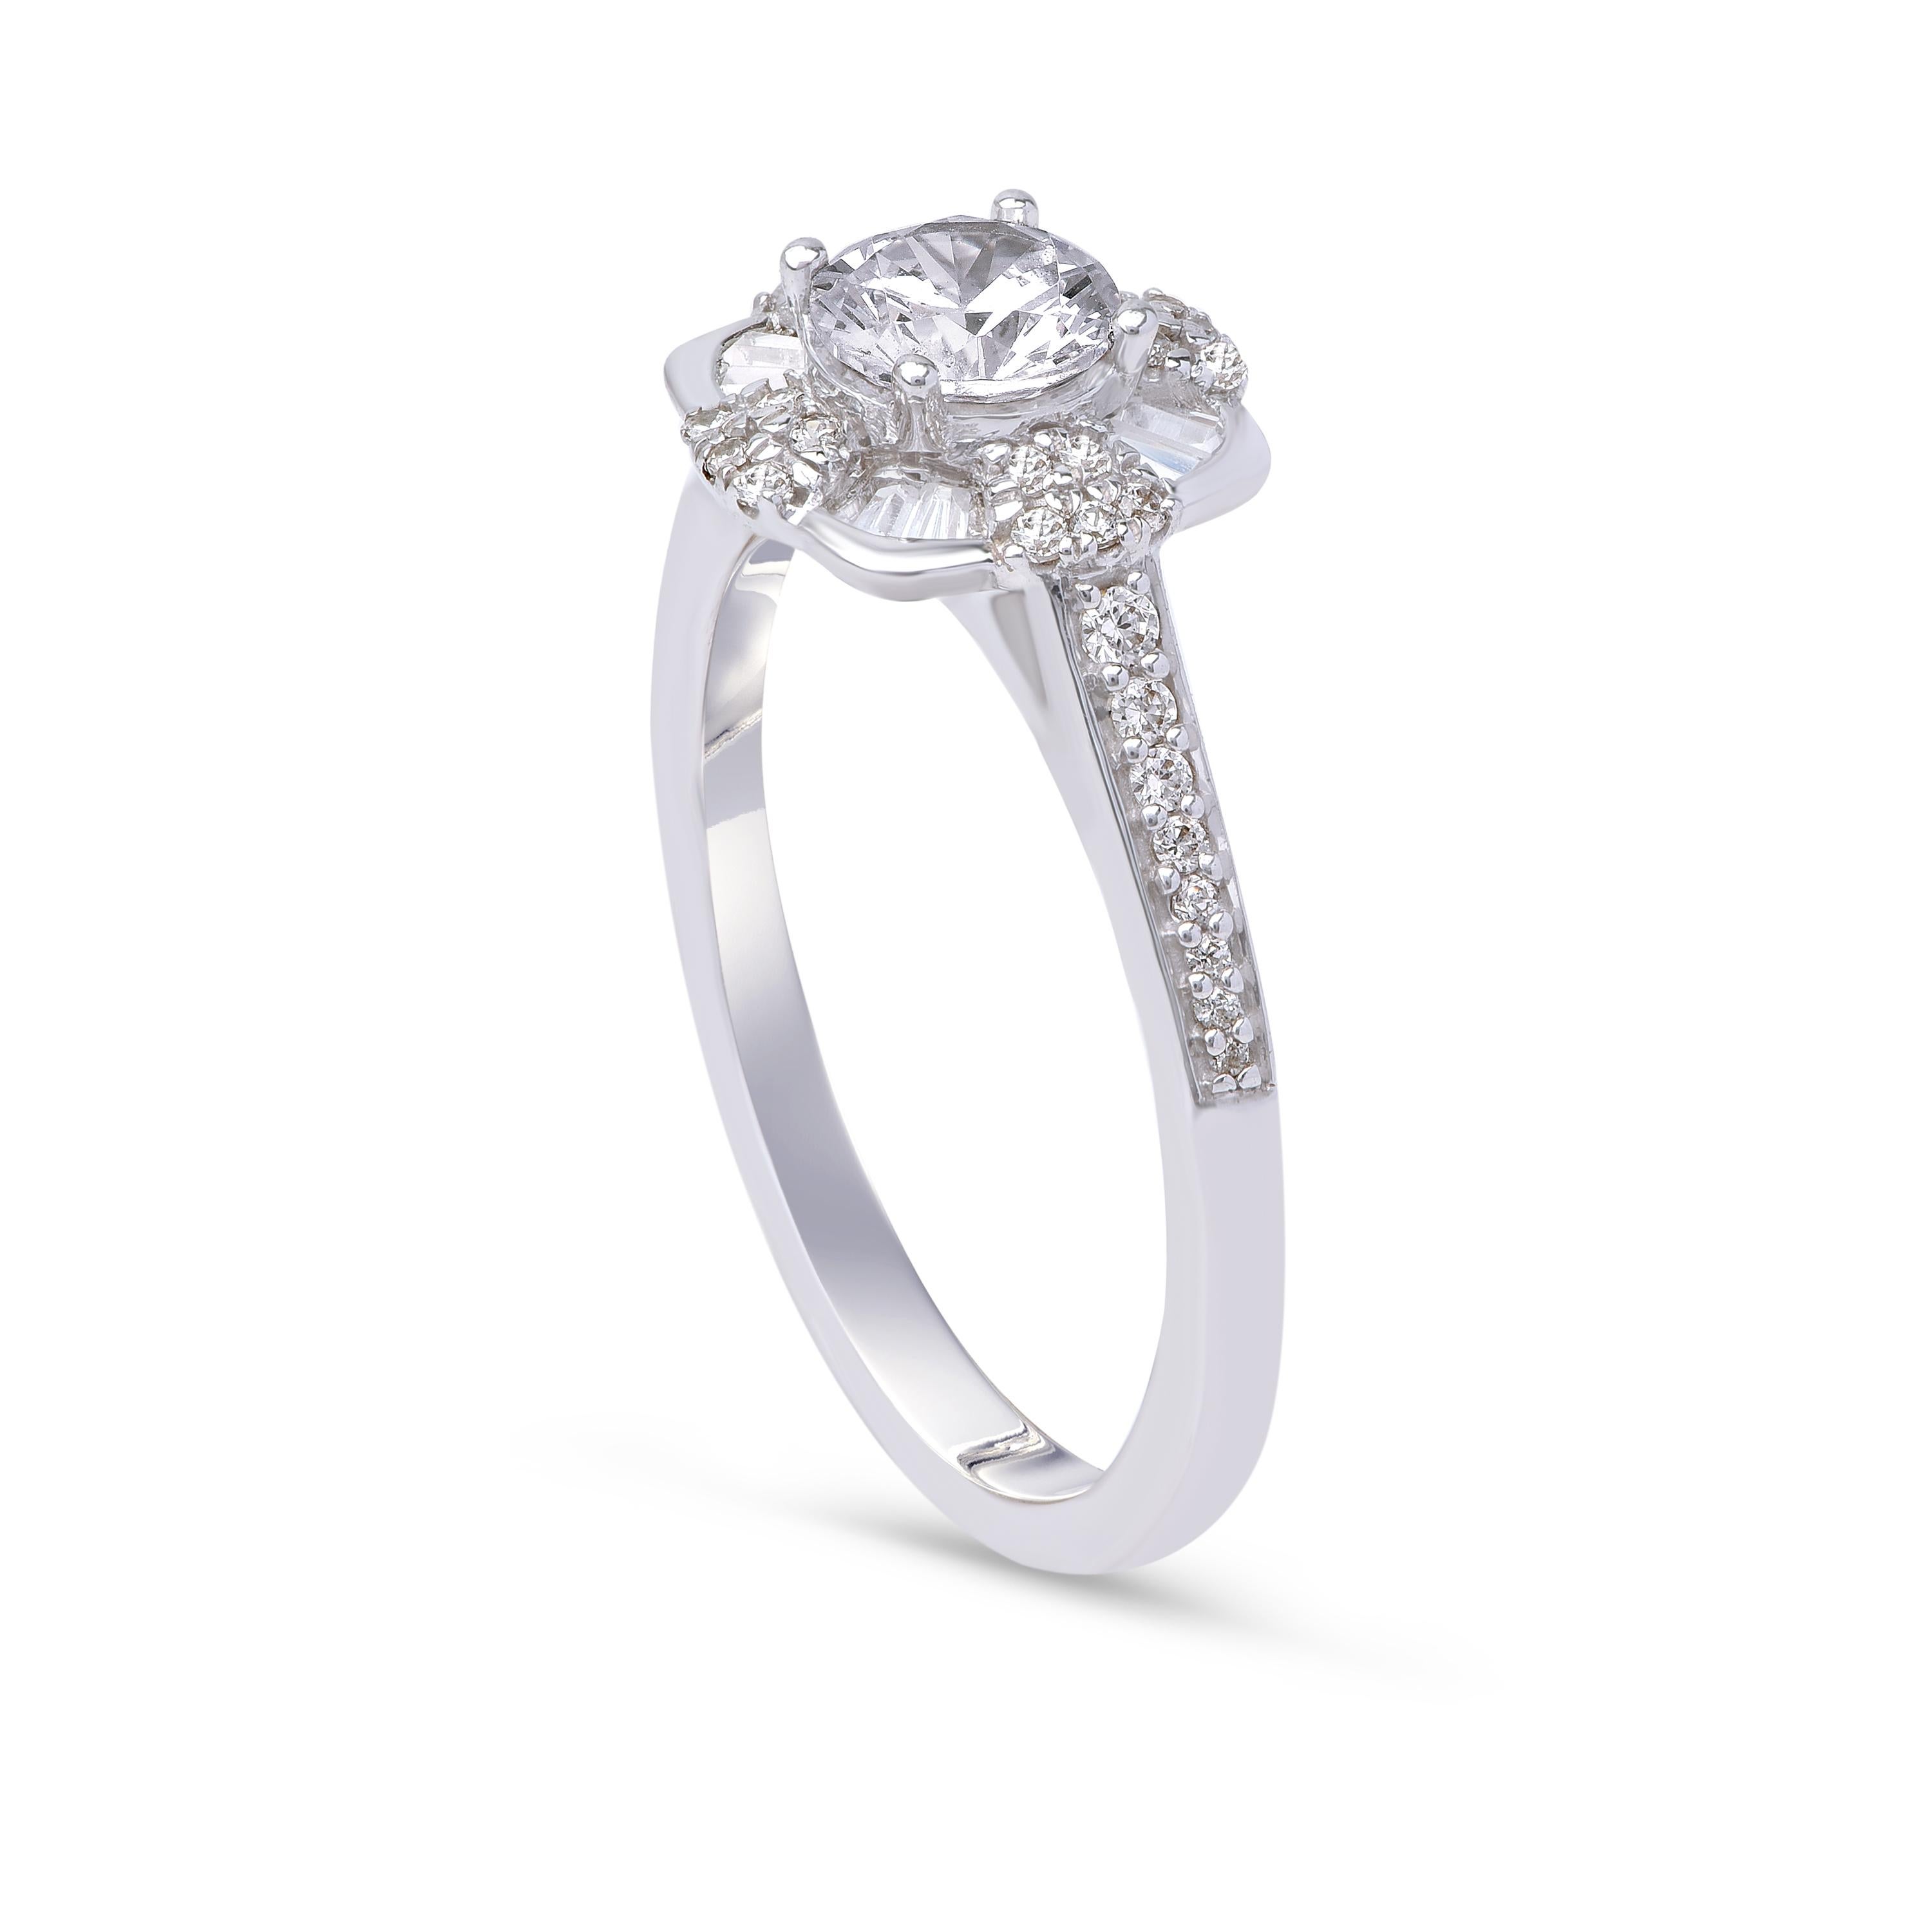 Dazzles with 37 brilliant and 12 baguette cut diamonds elegantly set in micro-prong, pave, prong and channel setting - crafted in 18 KT white gold. Diamonds are graded H-I Color, I1 Clarity.

Metal color and ring size can be customized on request.